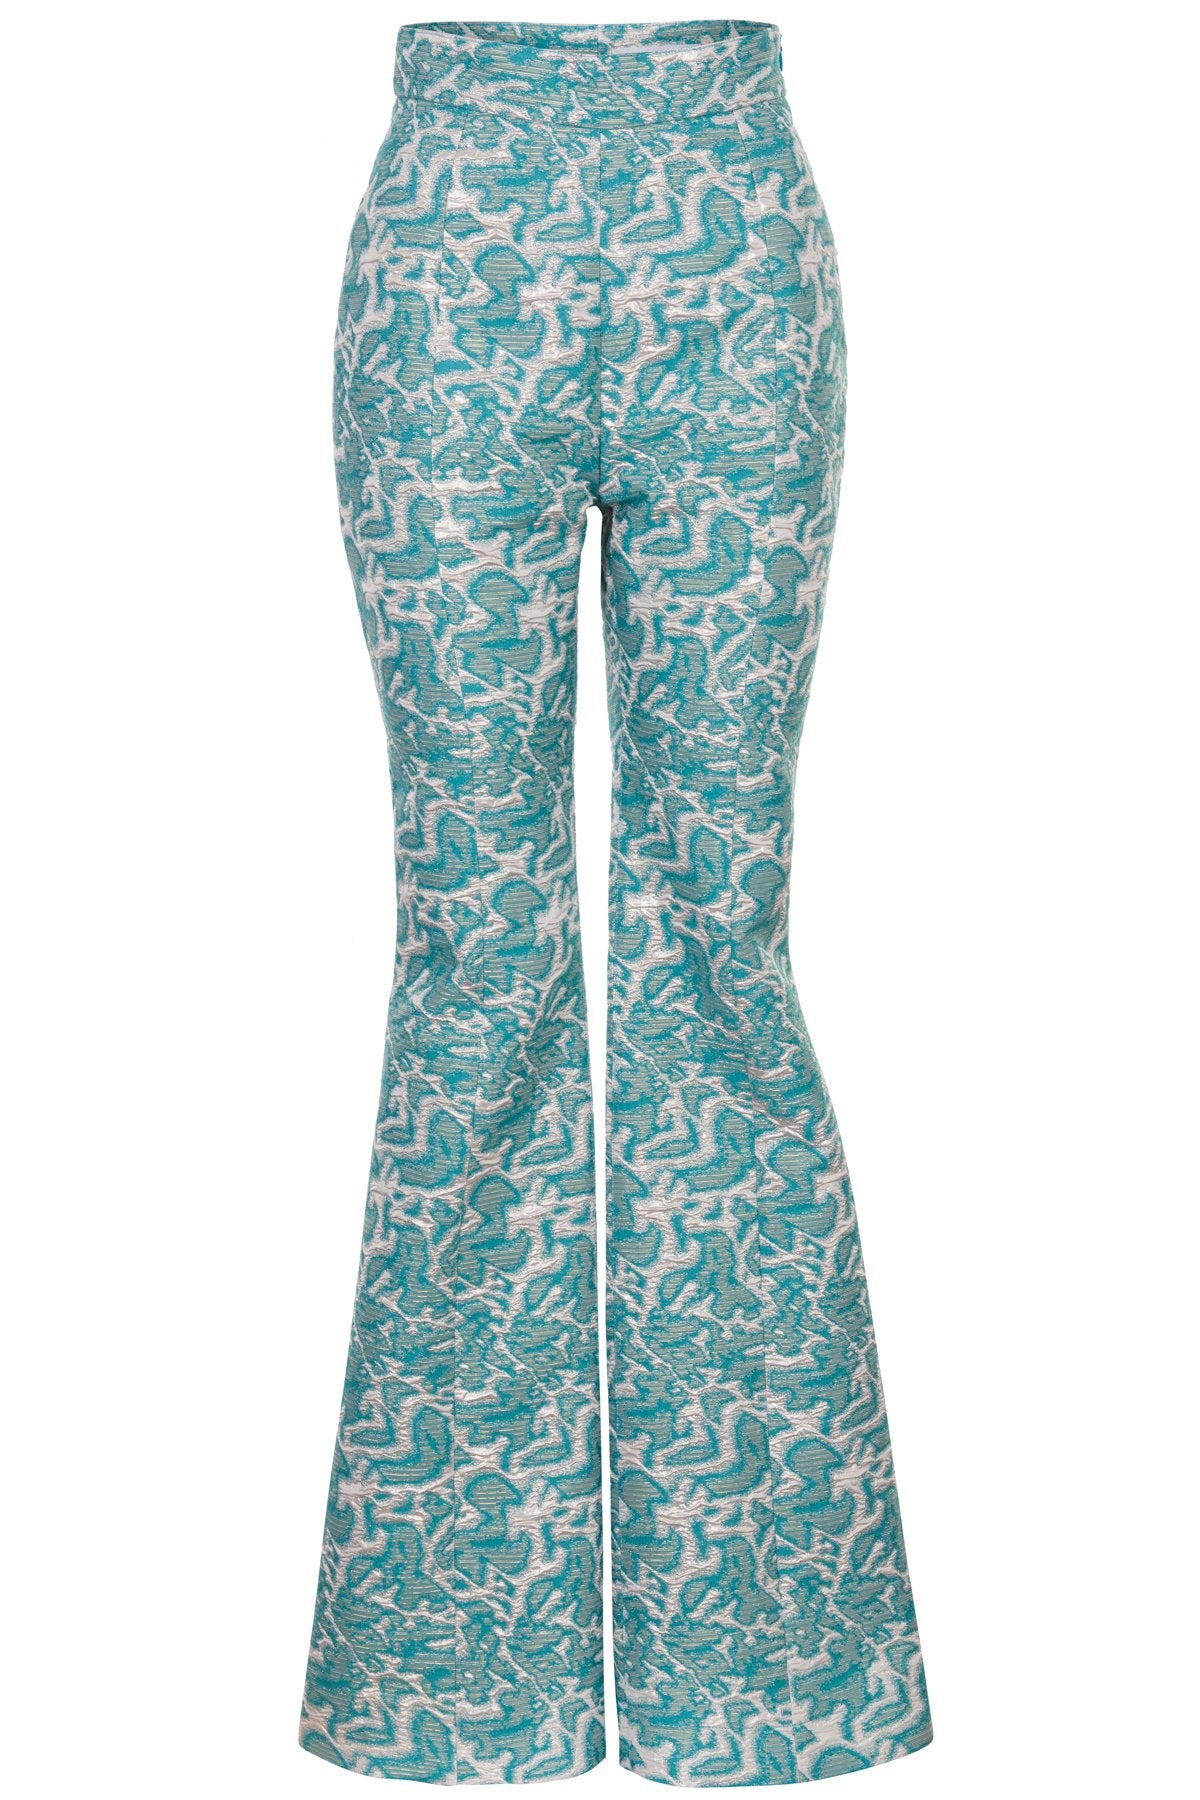 Pre-Order Ronnie Metallic Jacquard Flared Trousers - Women's Trousers : Natalie & Alanna - Women's Clothing & Accesssories